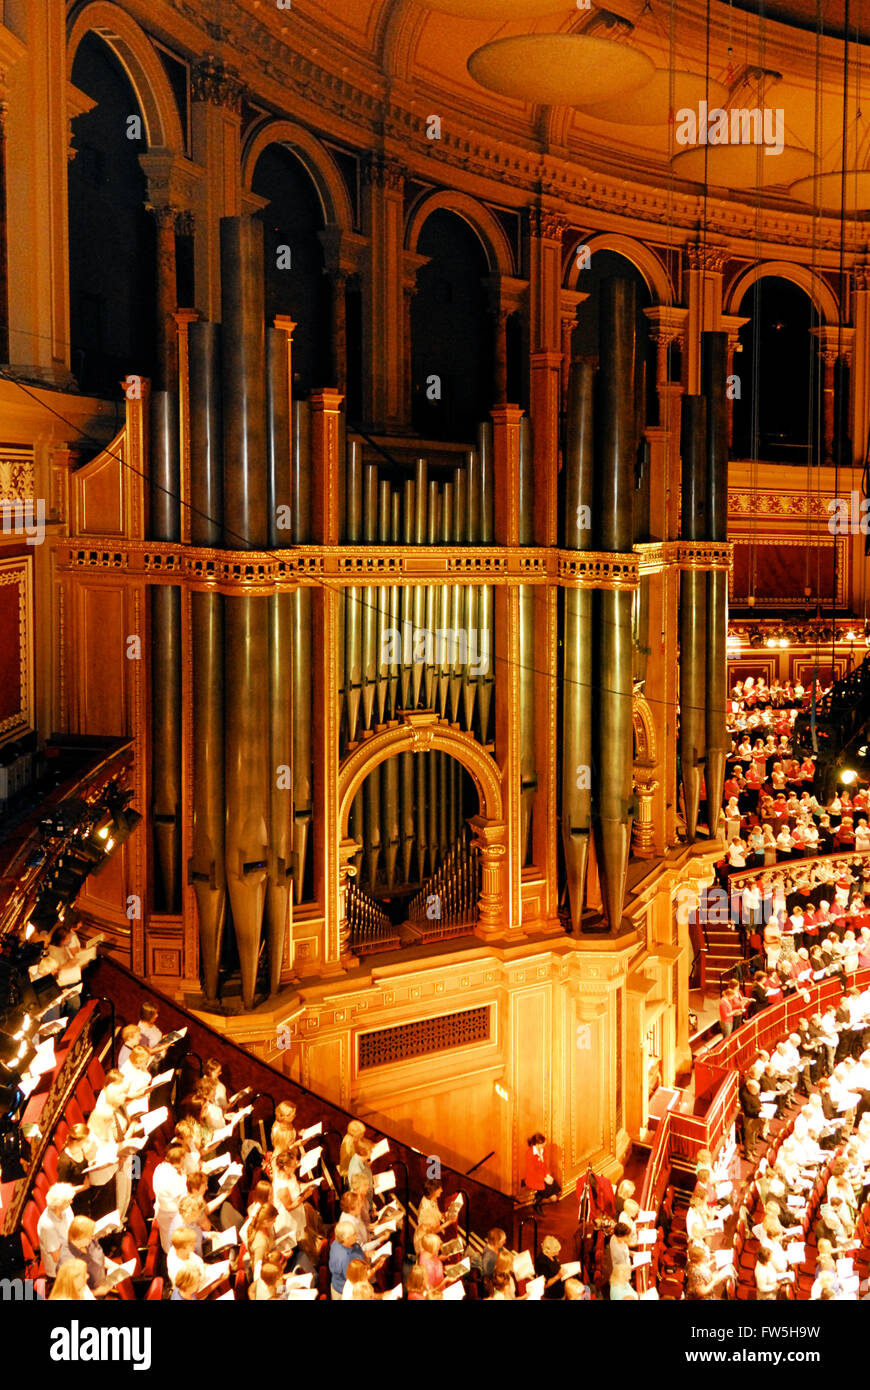 Royal Albert Hall, view from the 'gods', the highest seat in the house, over the organ with 32 foot pipes. Stock Photo